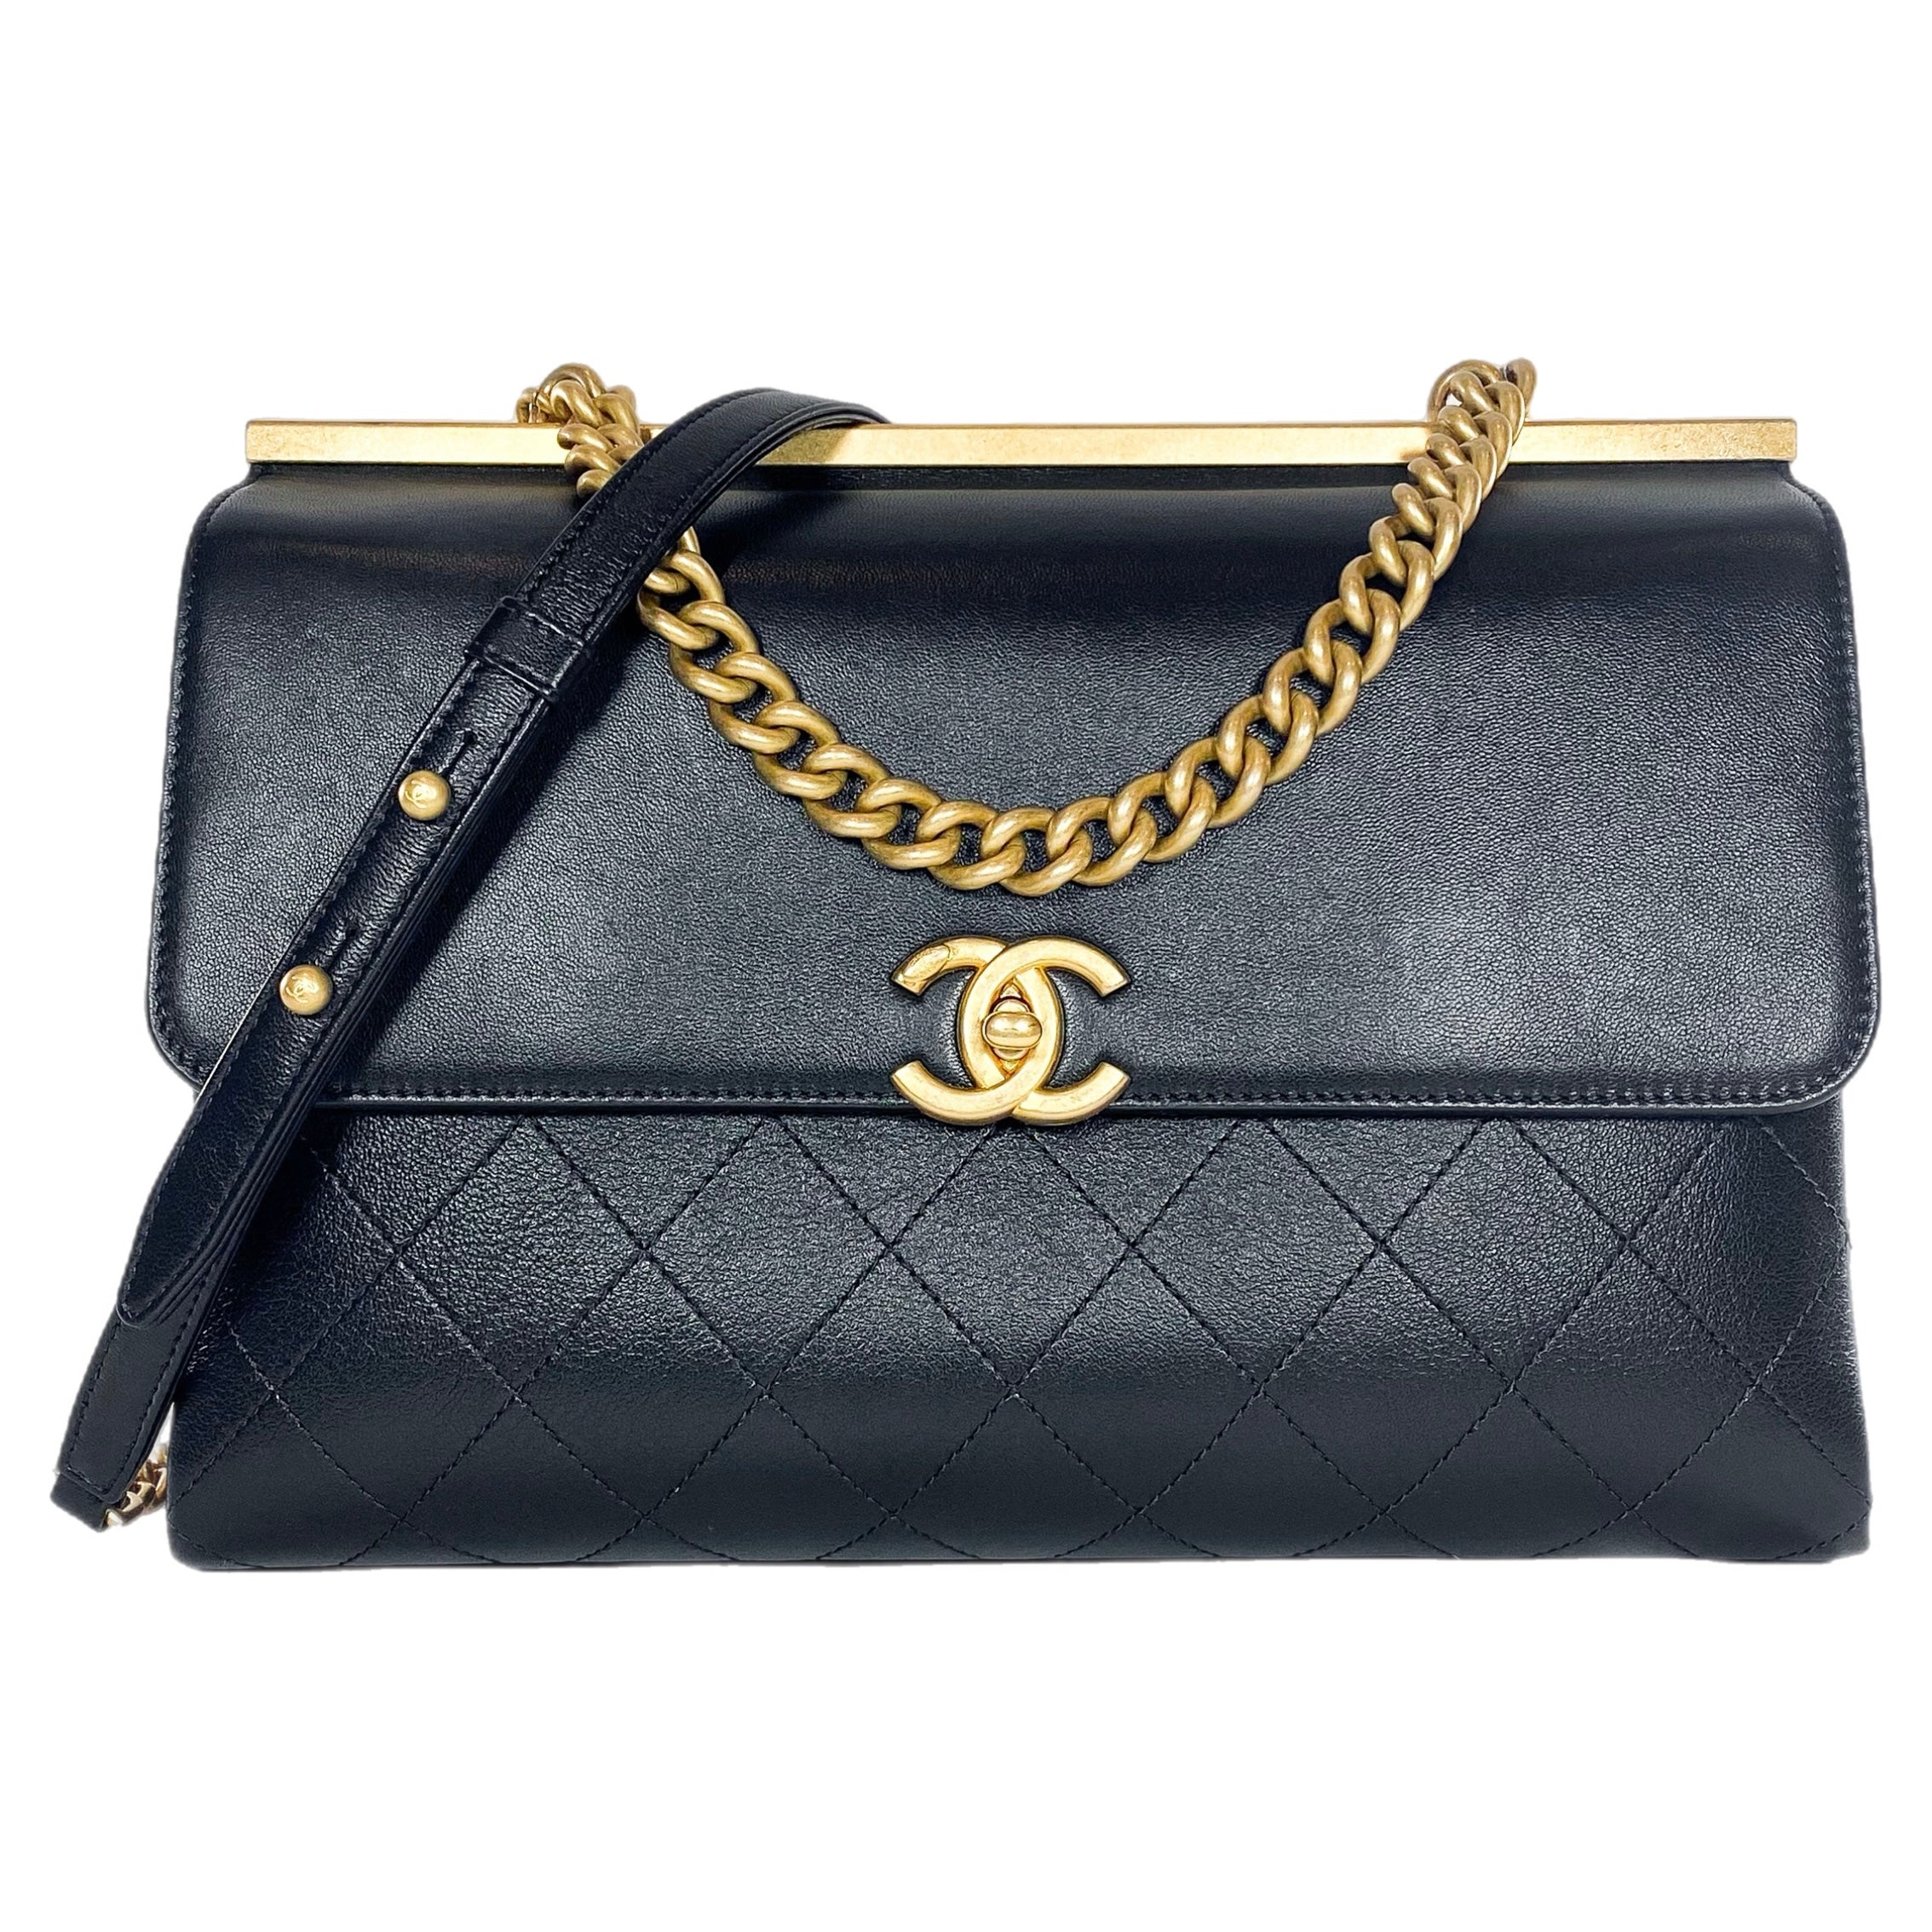 Chanel Black Coco Luxe Two Pocket Flap Bag